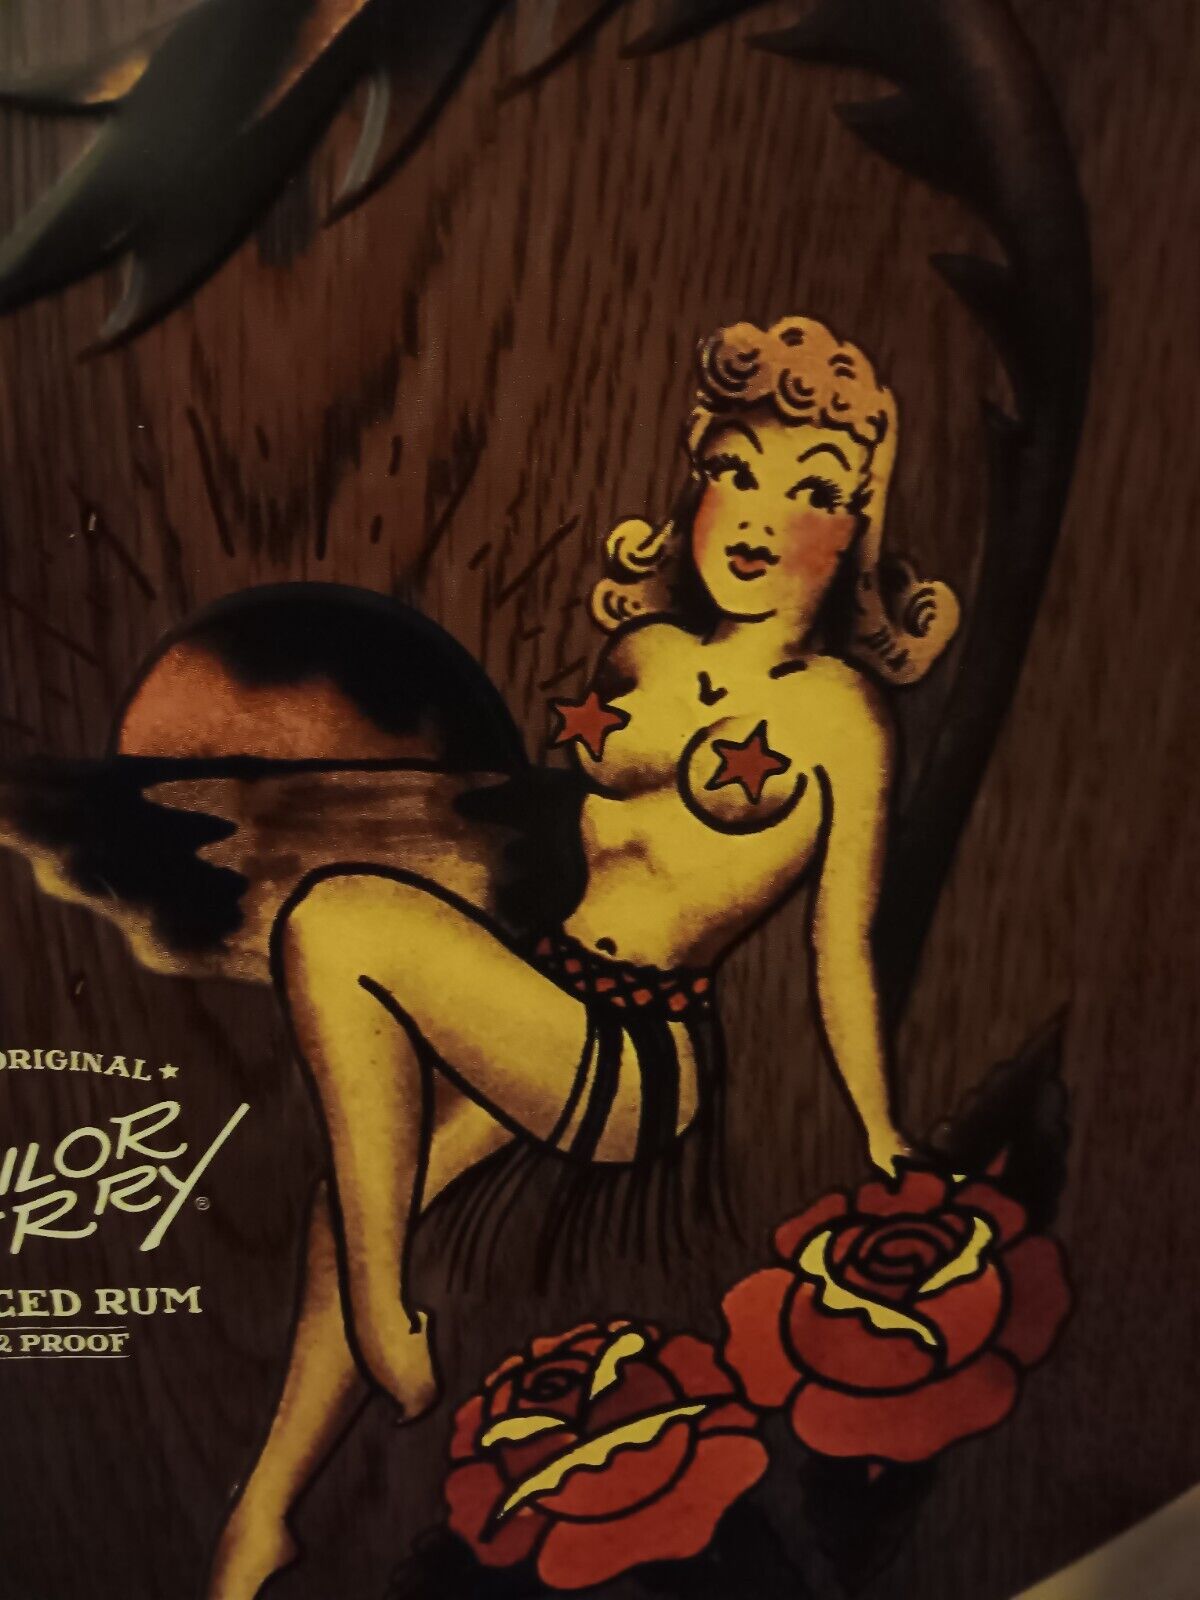 Sailor Jerry spice rum metal sign scantily clad island beauty with star boobs